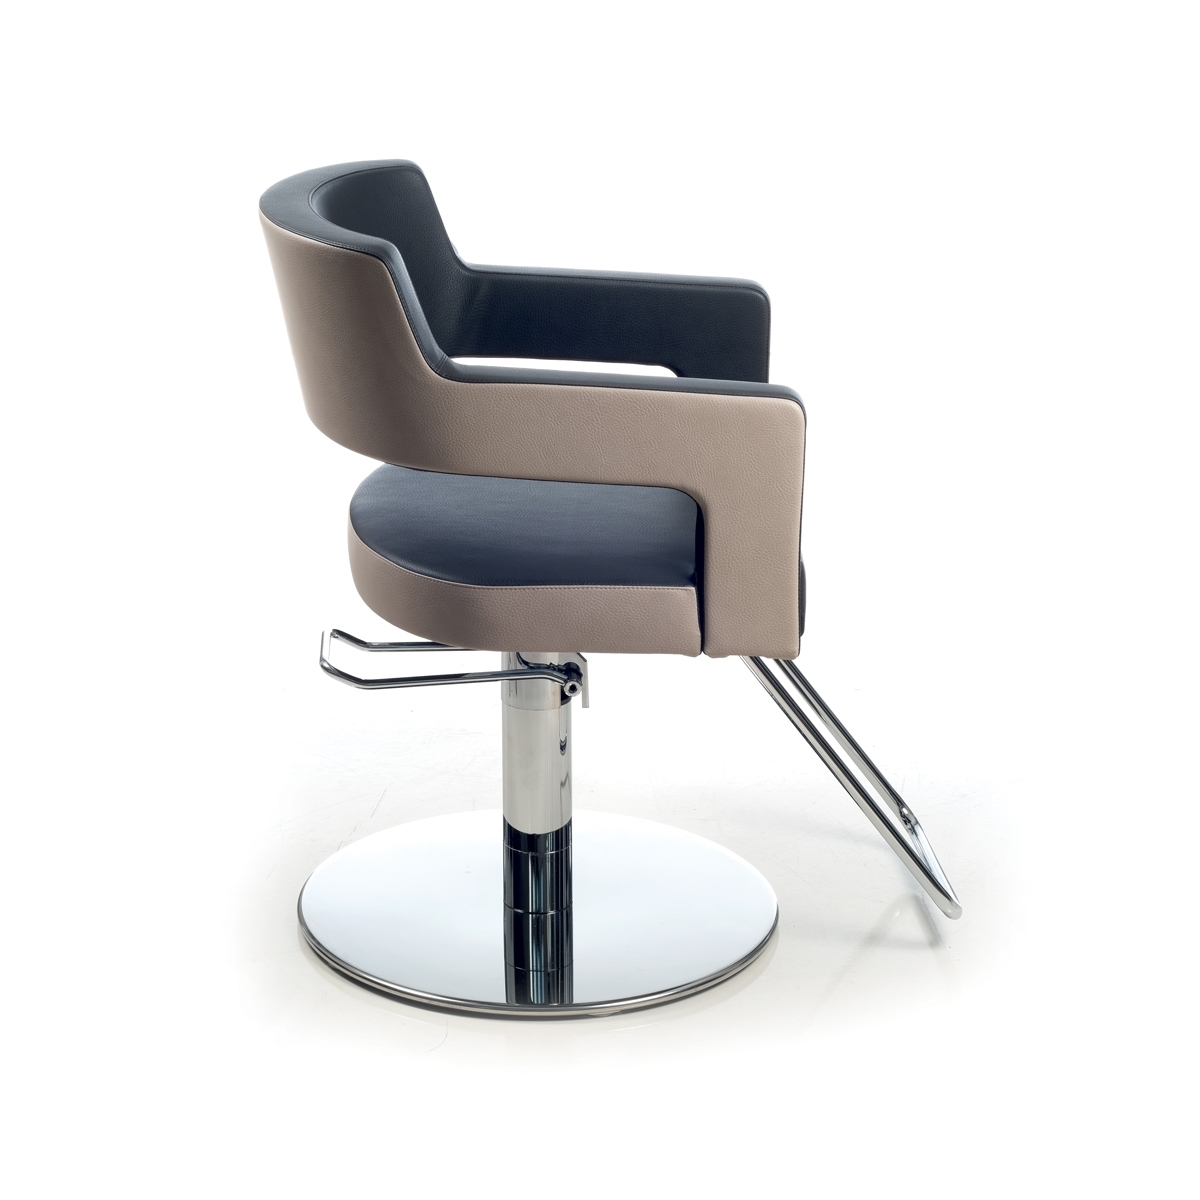 Creusa Black Styling Chair with Roto Base by Gamma & Bross Spa